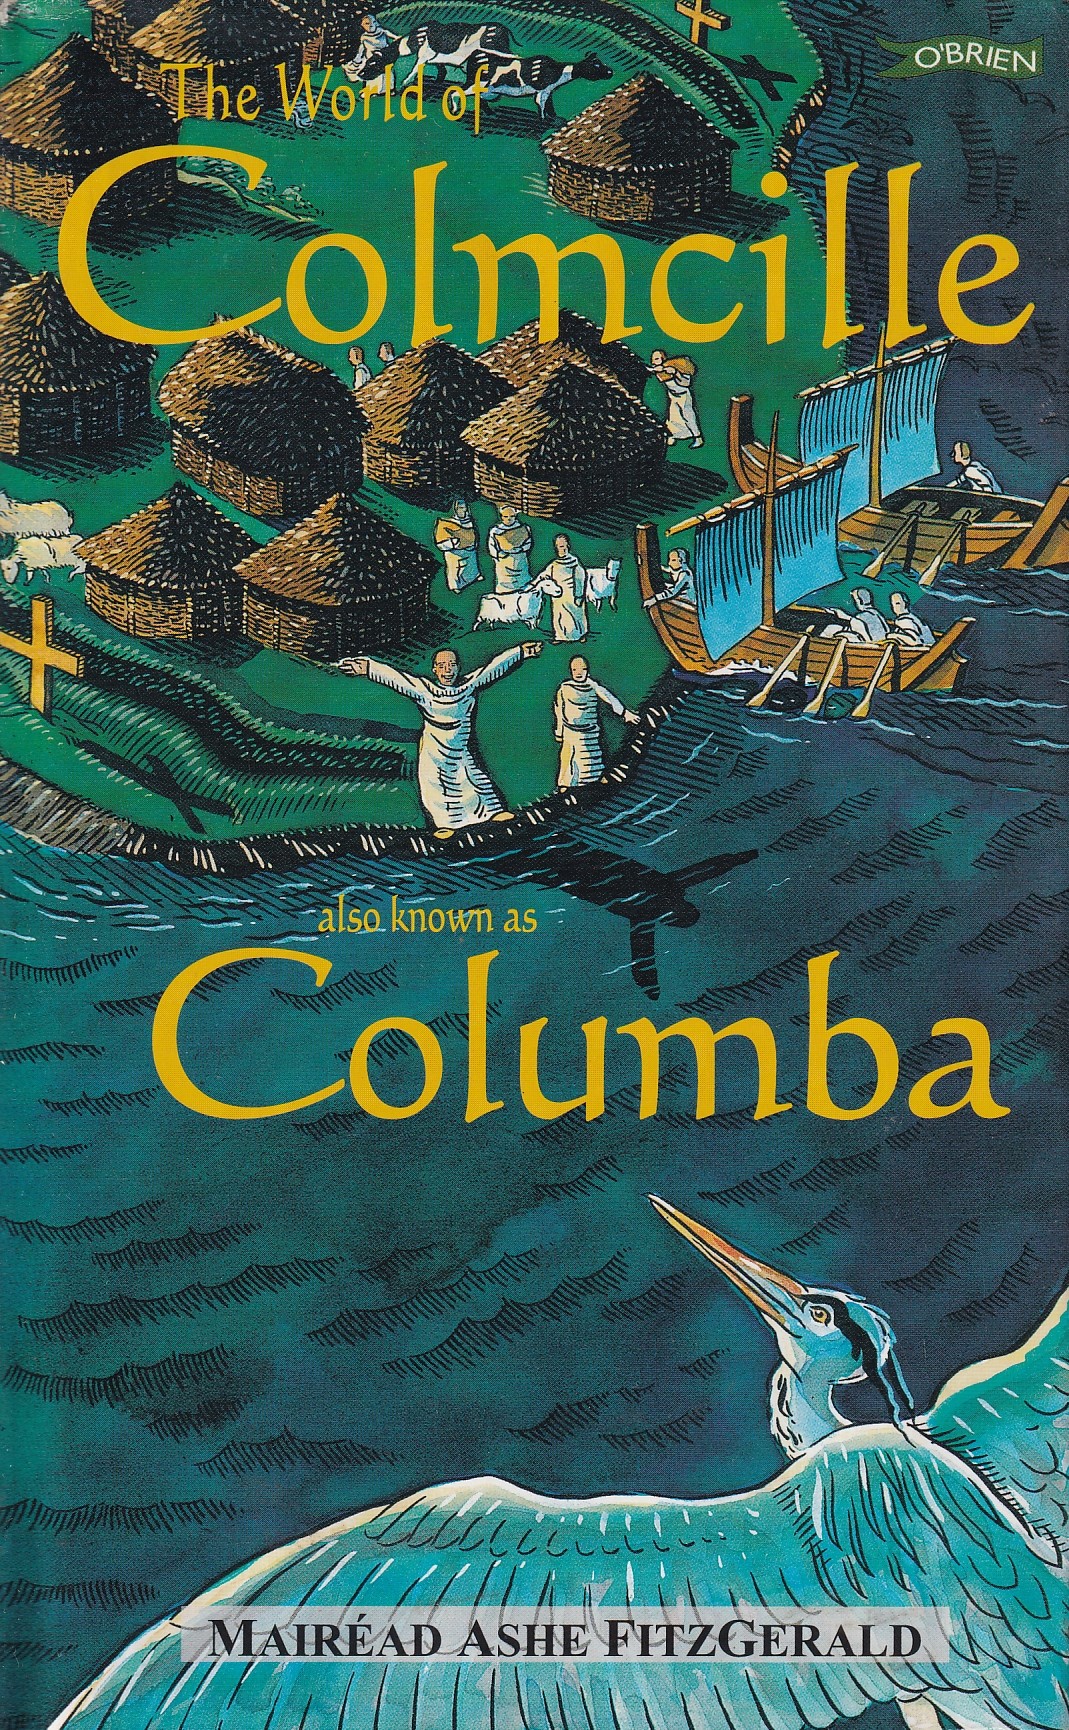 The World of Colmcille: Also Known as Columbia by Mairéad Ashe Fitzgerald